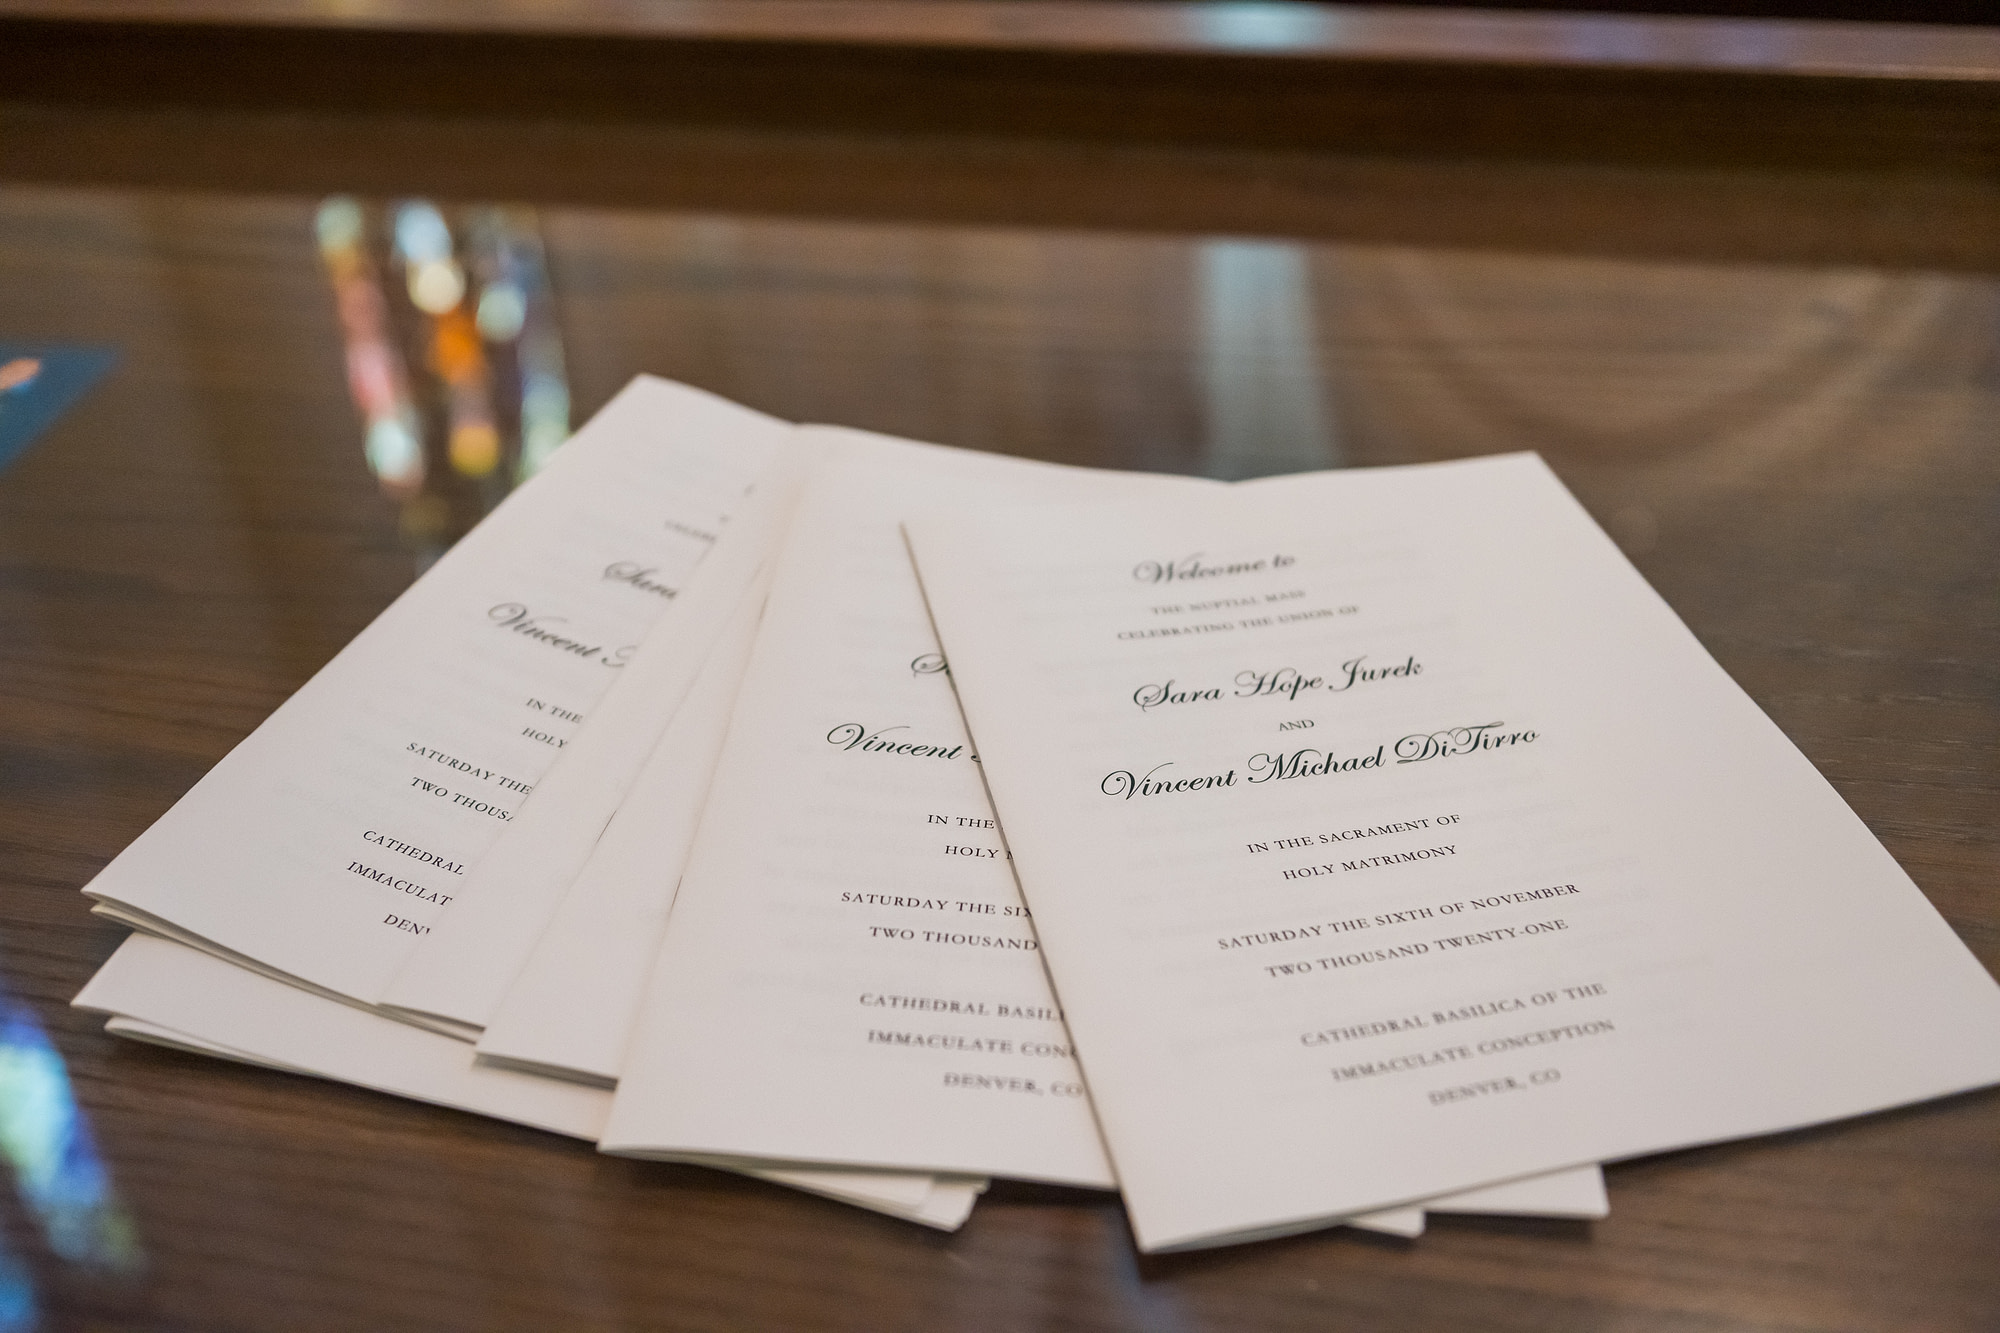 Programs during a Cathedral Basilica of the Immaculate Conception wedding in Denver, Colorado.